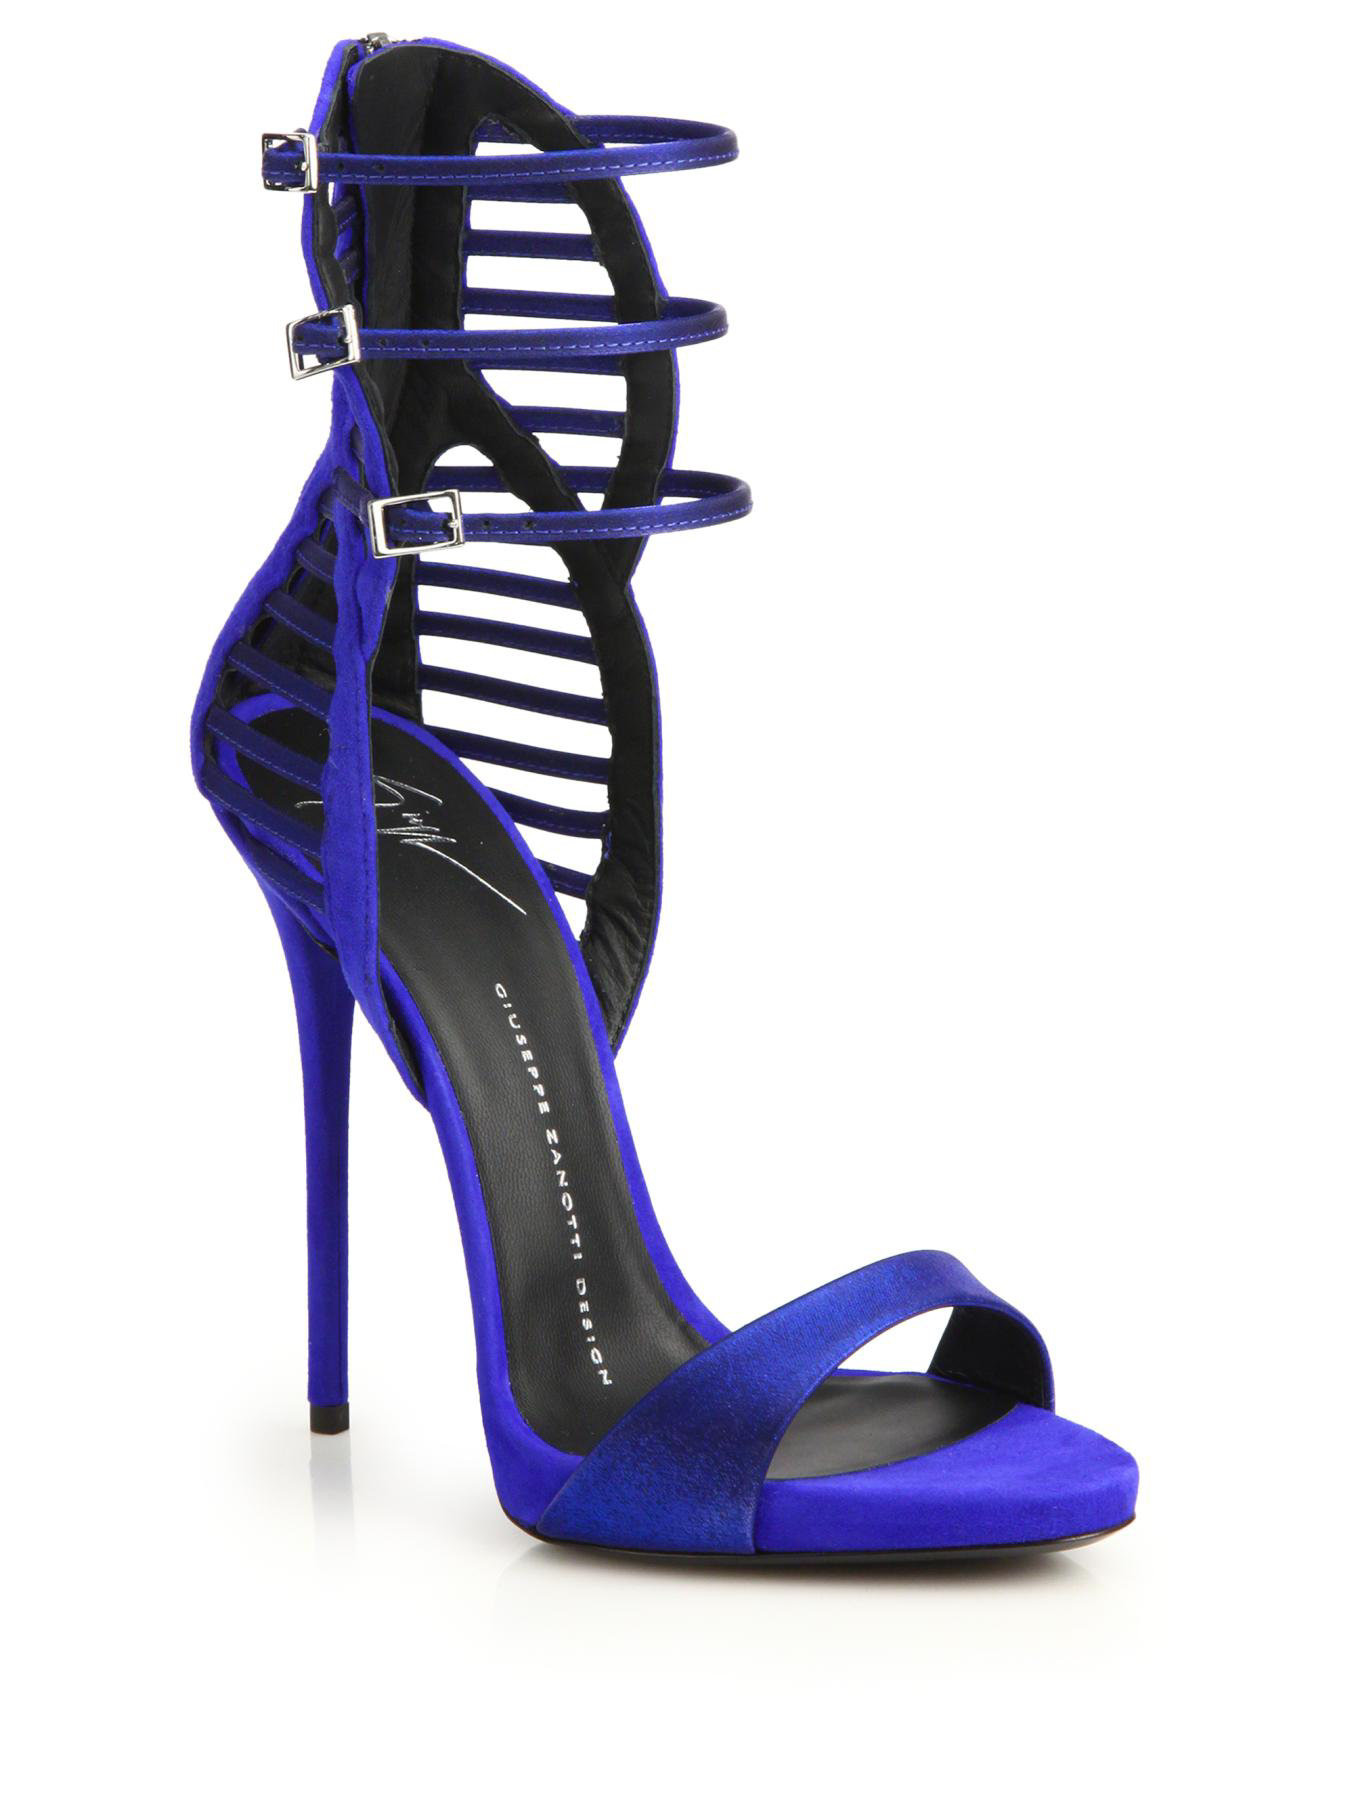 Giuseppe Zanotti Suede & Satin Cage Sandals in Blue | Lyst